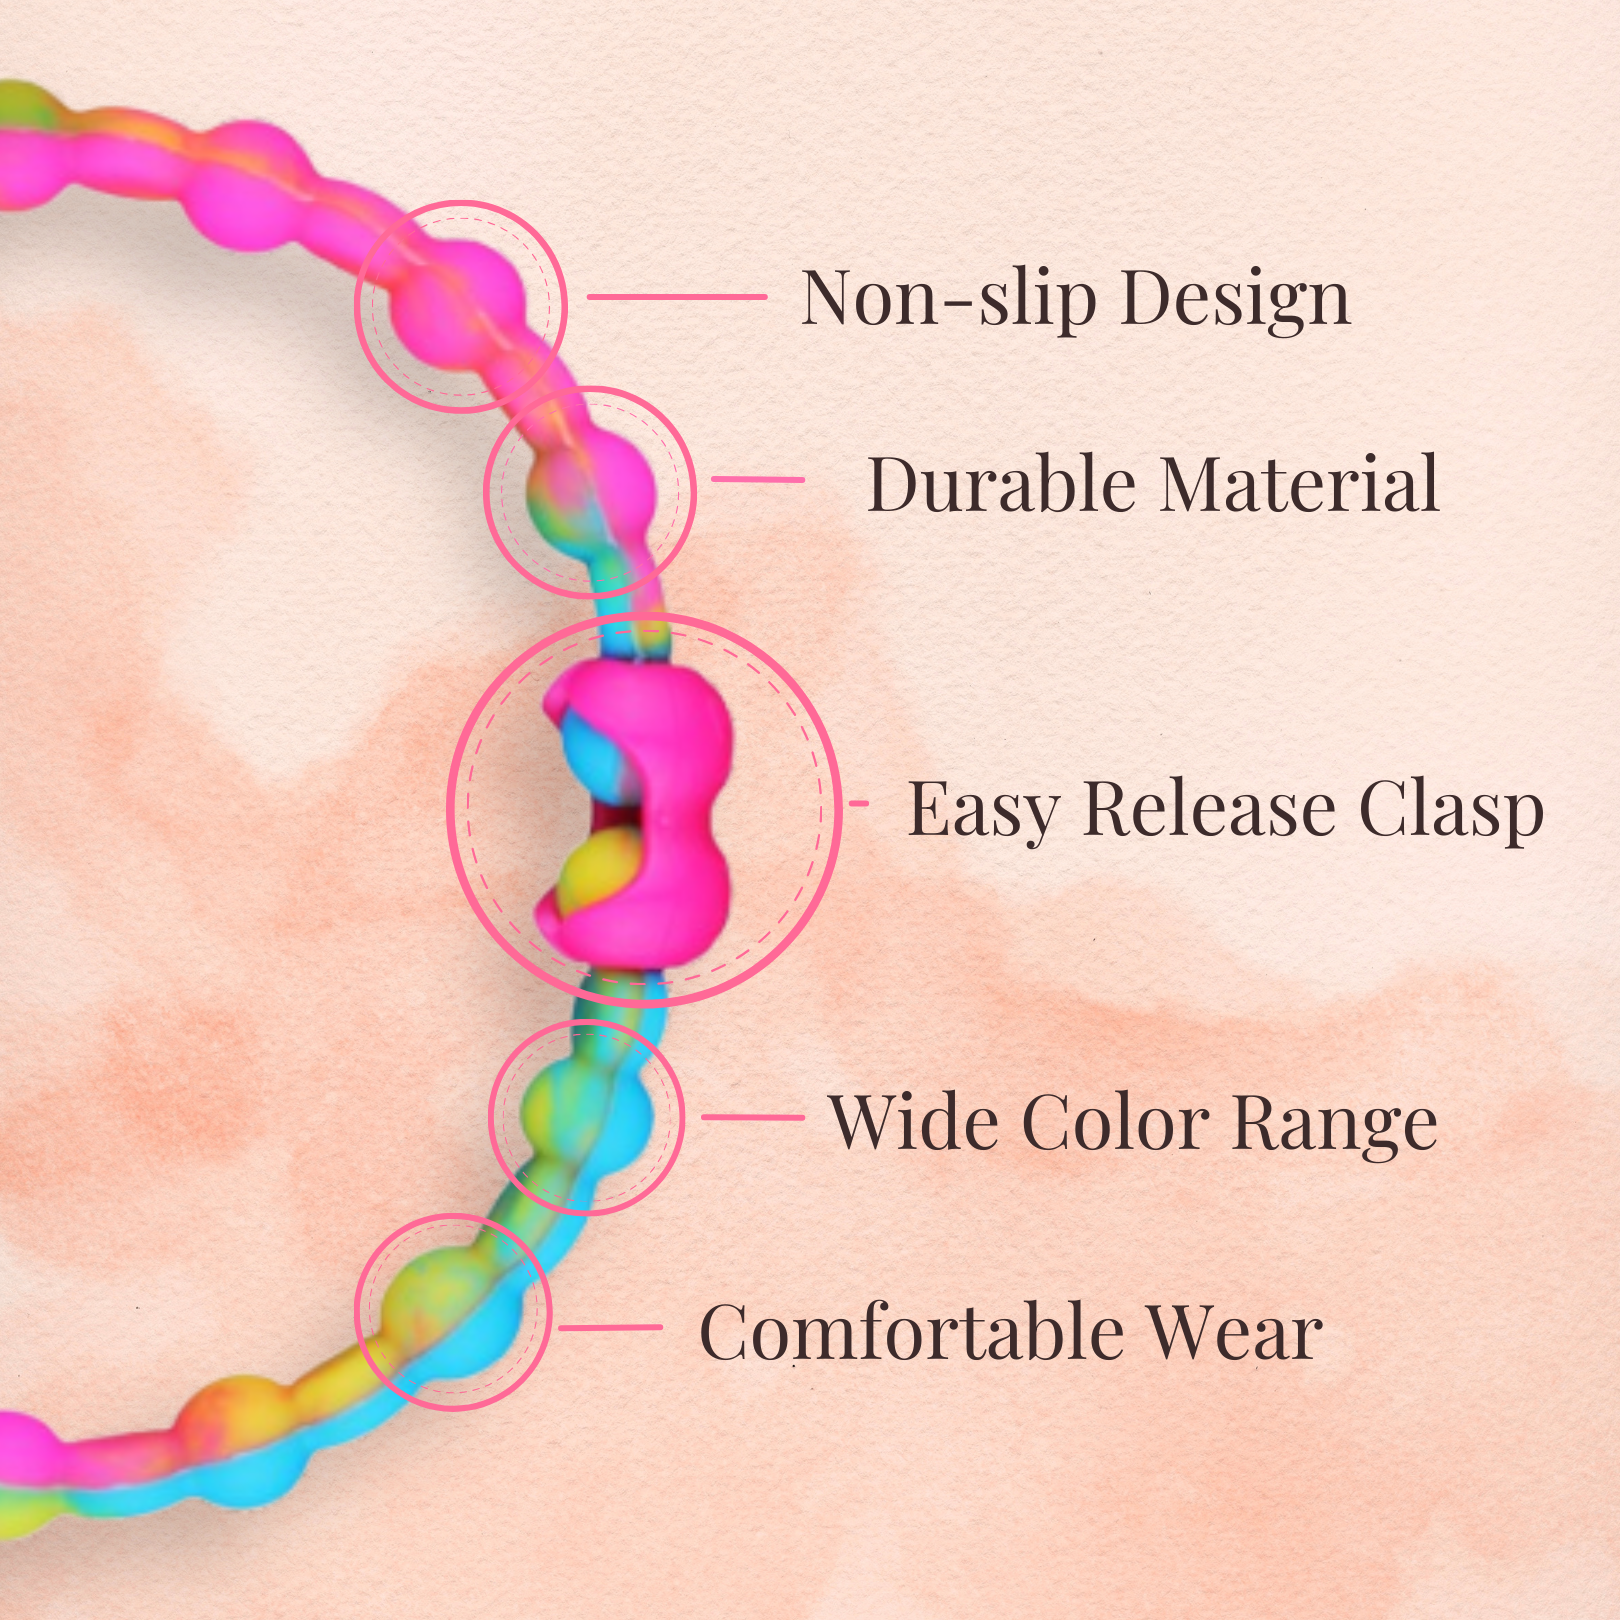 Barley PRO Hair Ties: Easy Release Adjustable for Every Hair Type PACK OF 8